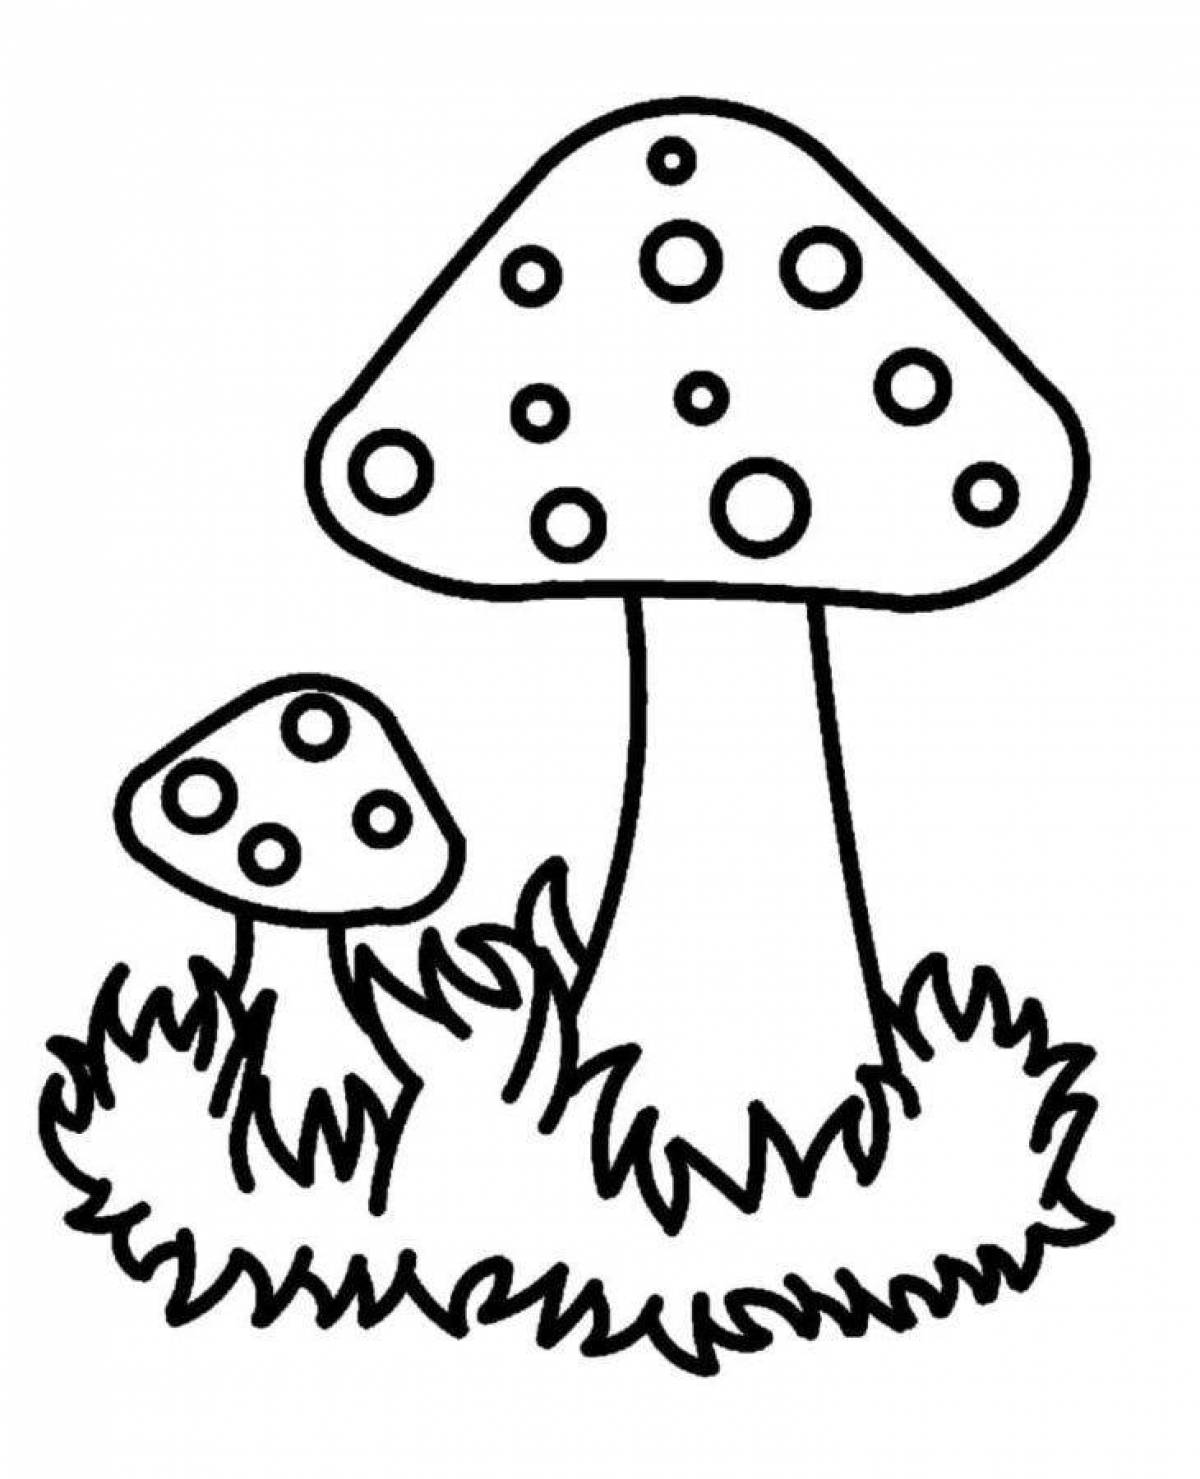 Glitter fungus coloring page